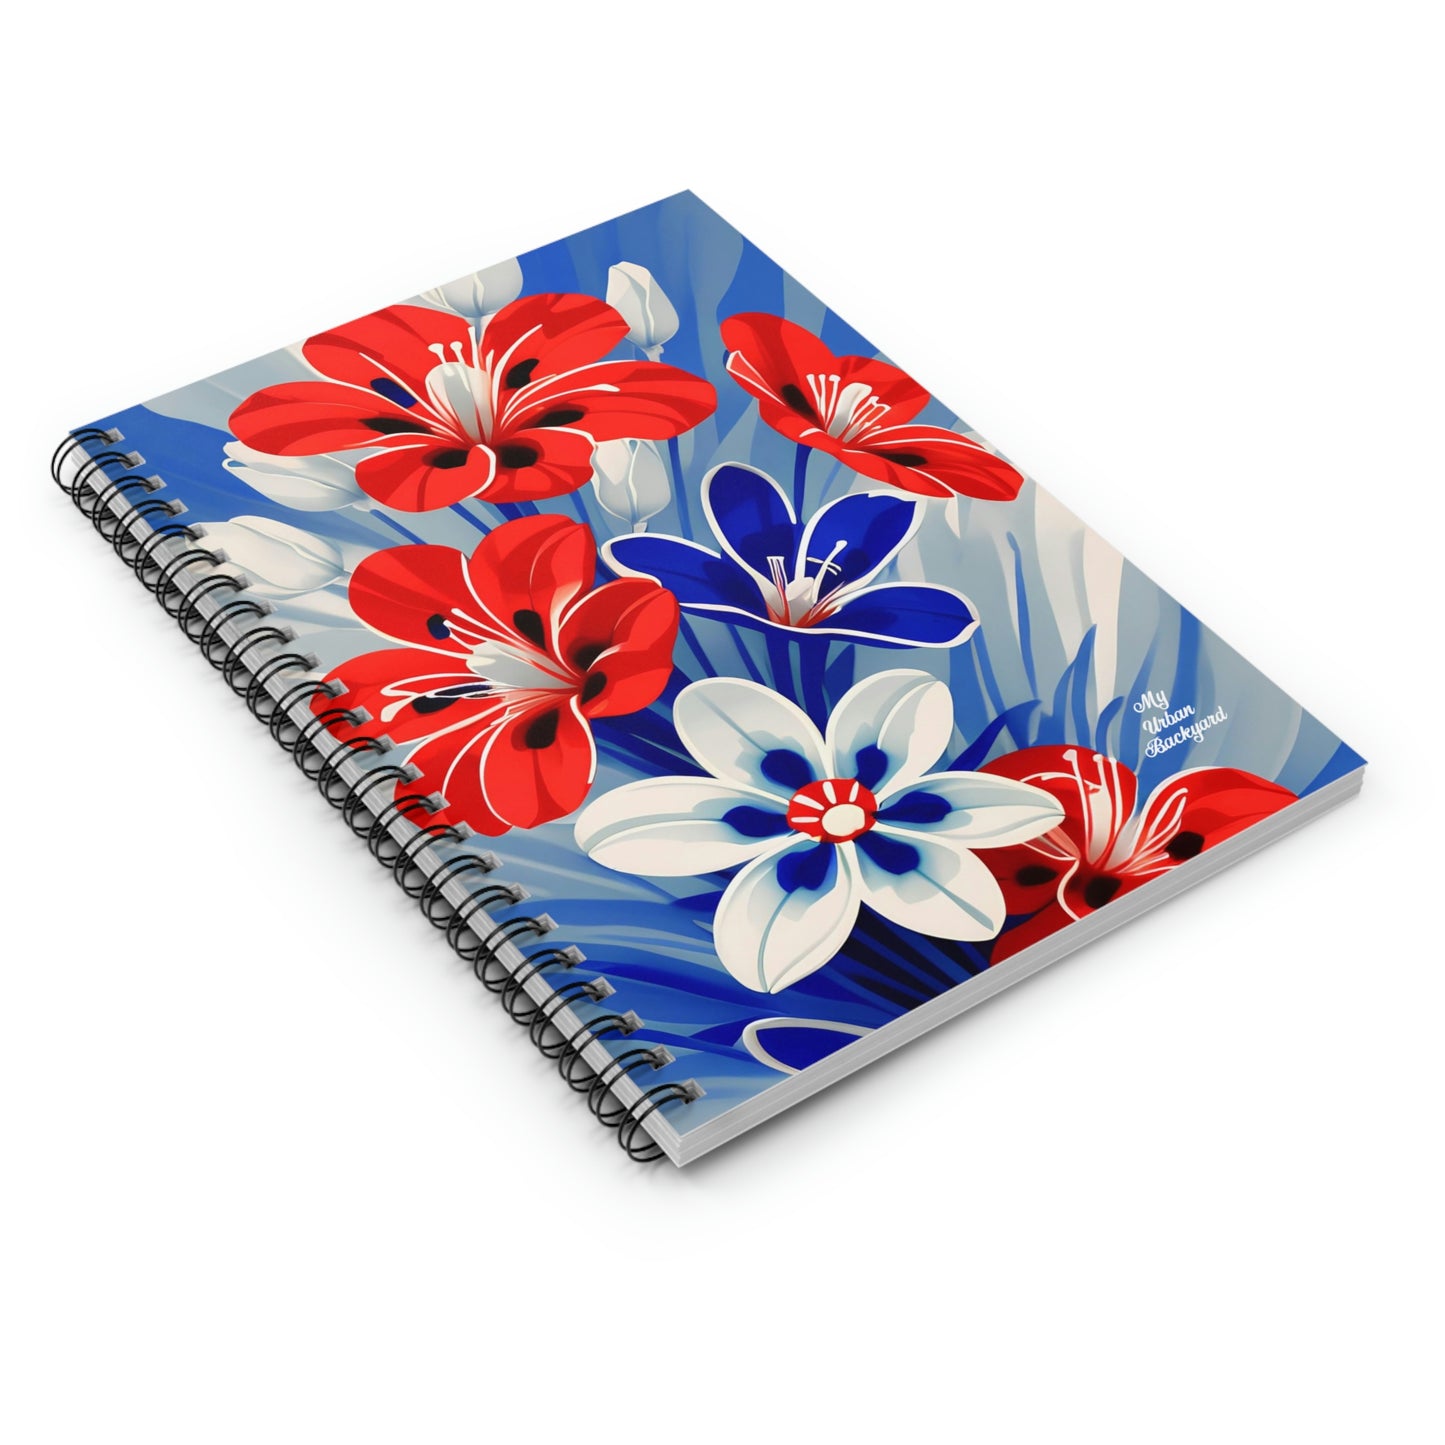 Red White and Blue Flowers, Spiral Notebook Journal - Write in Style